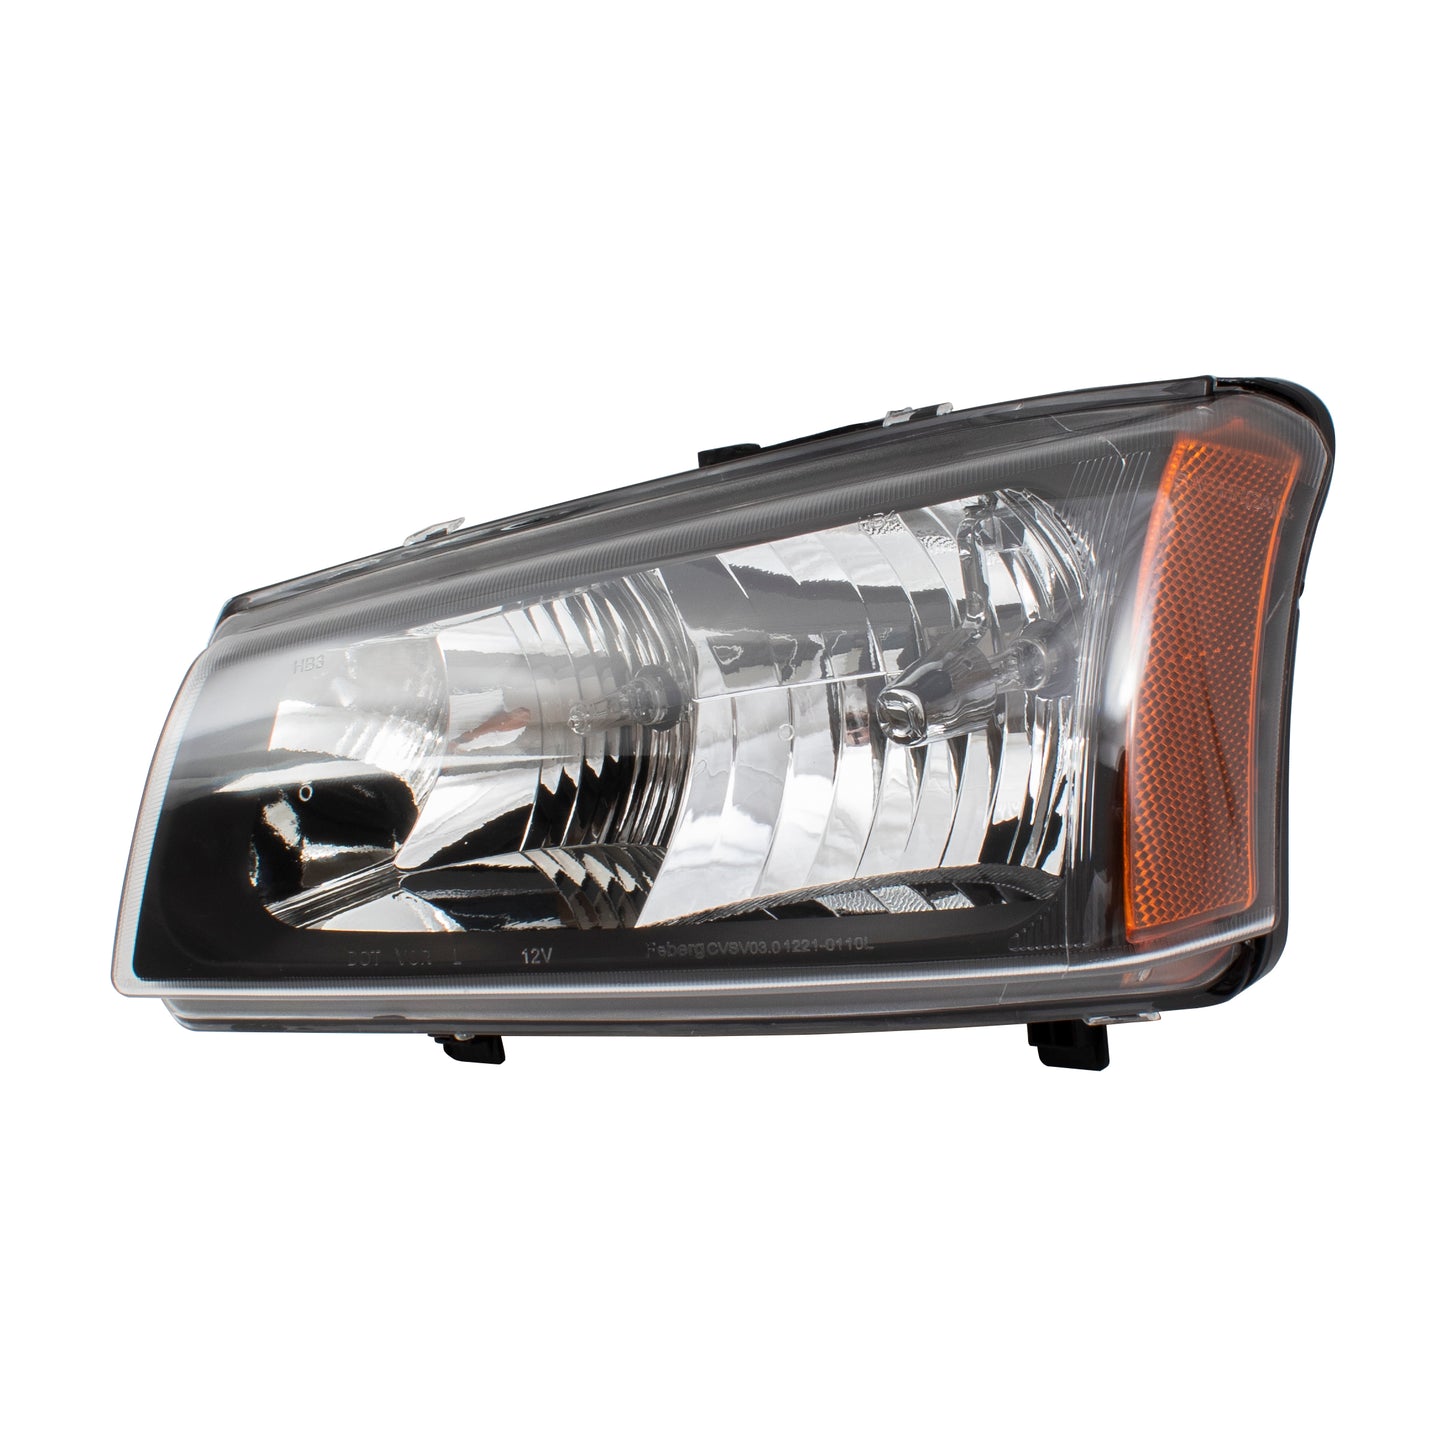 Brock Replacement Drivers Halogen Headlight Compatible with 03-06 Avalanche Silverado 07 Classic